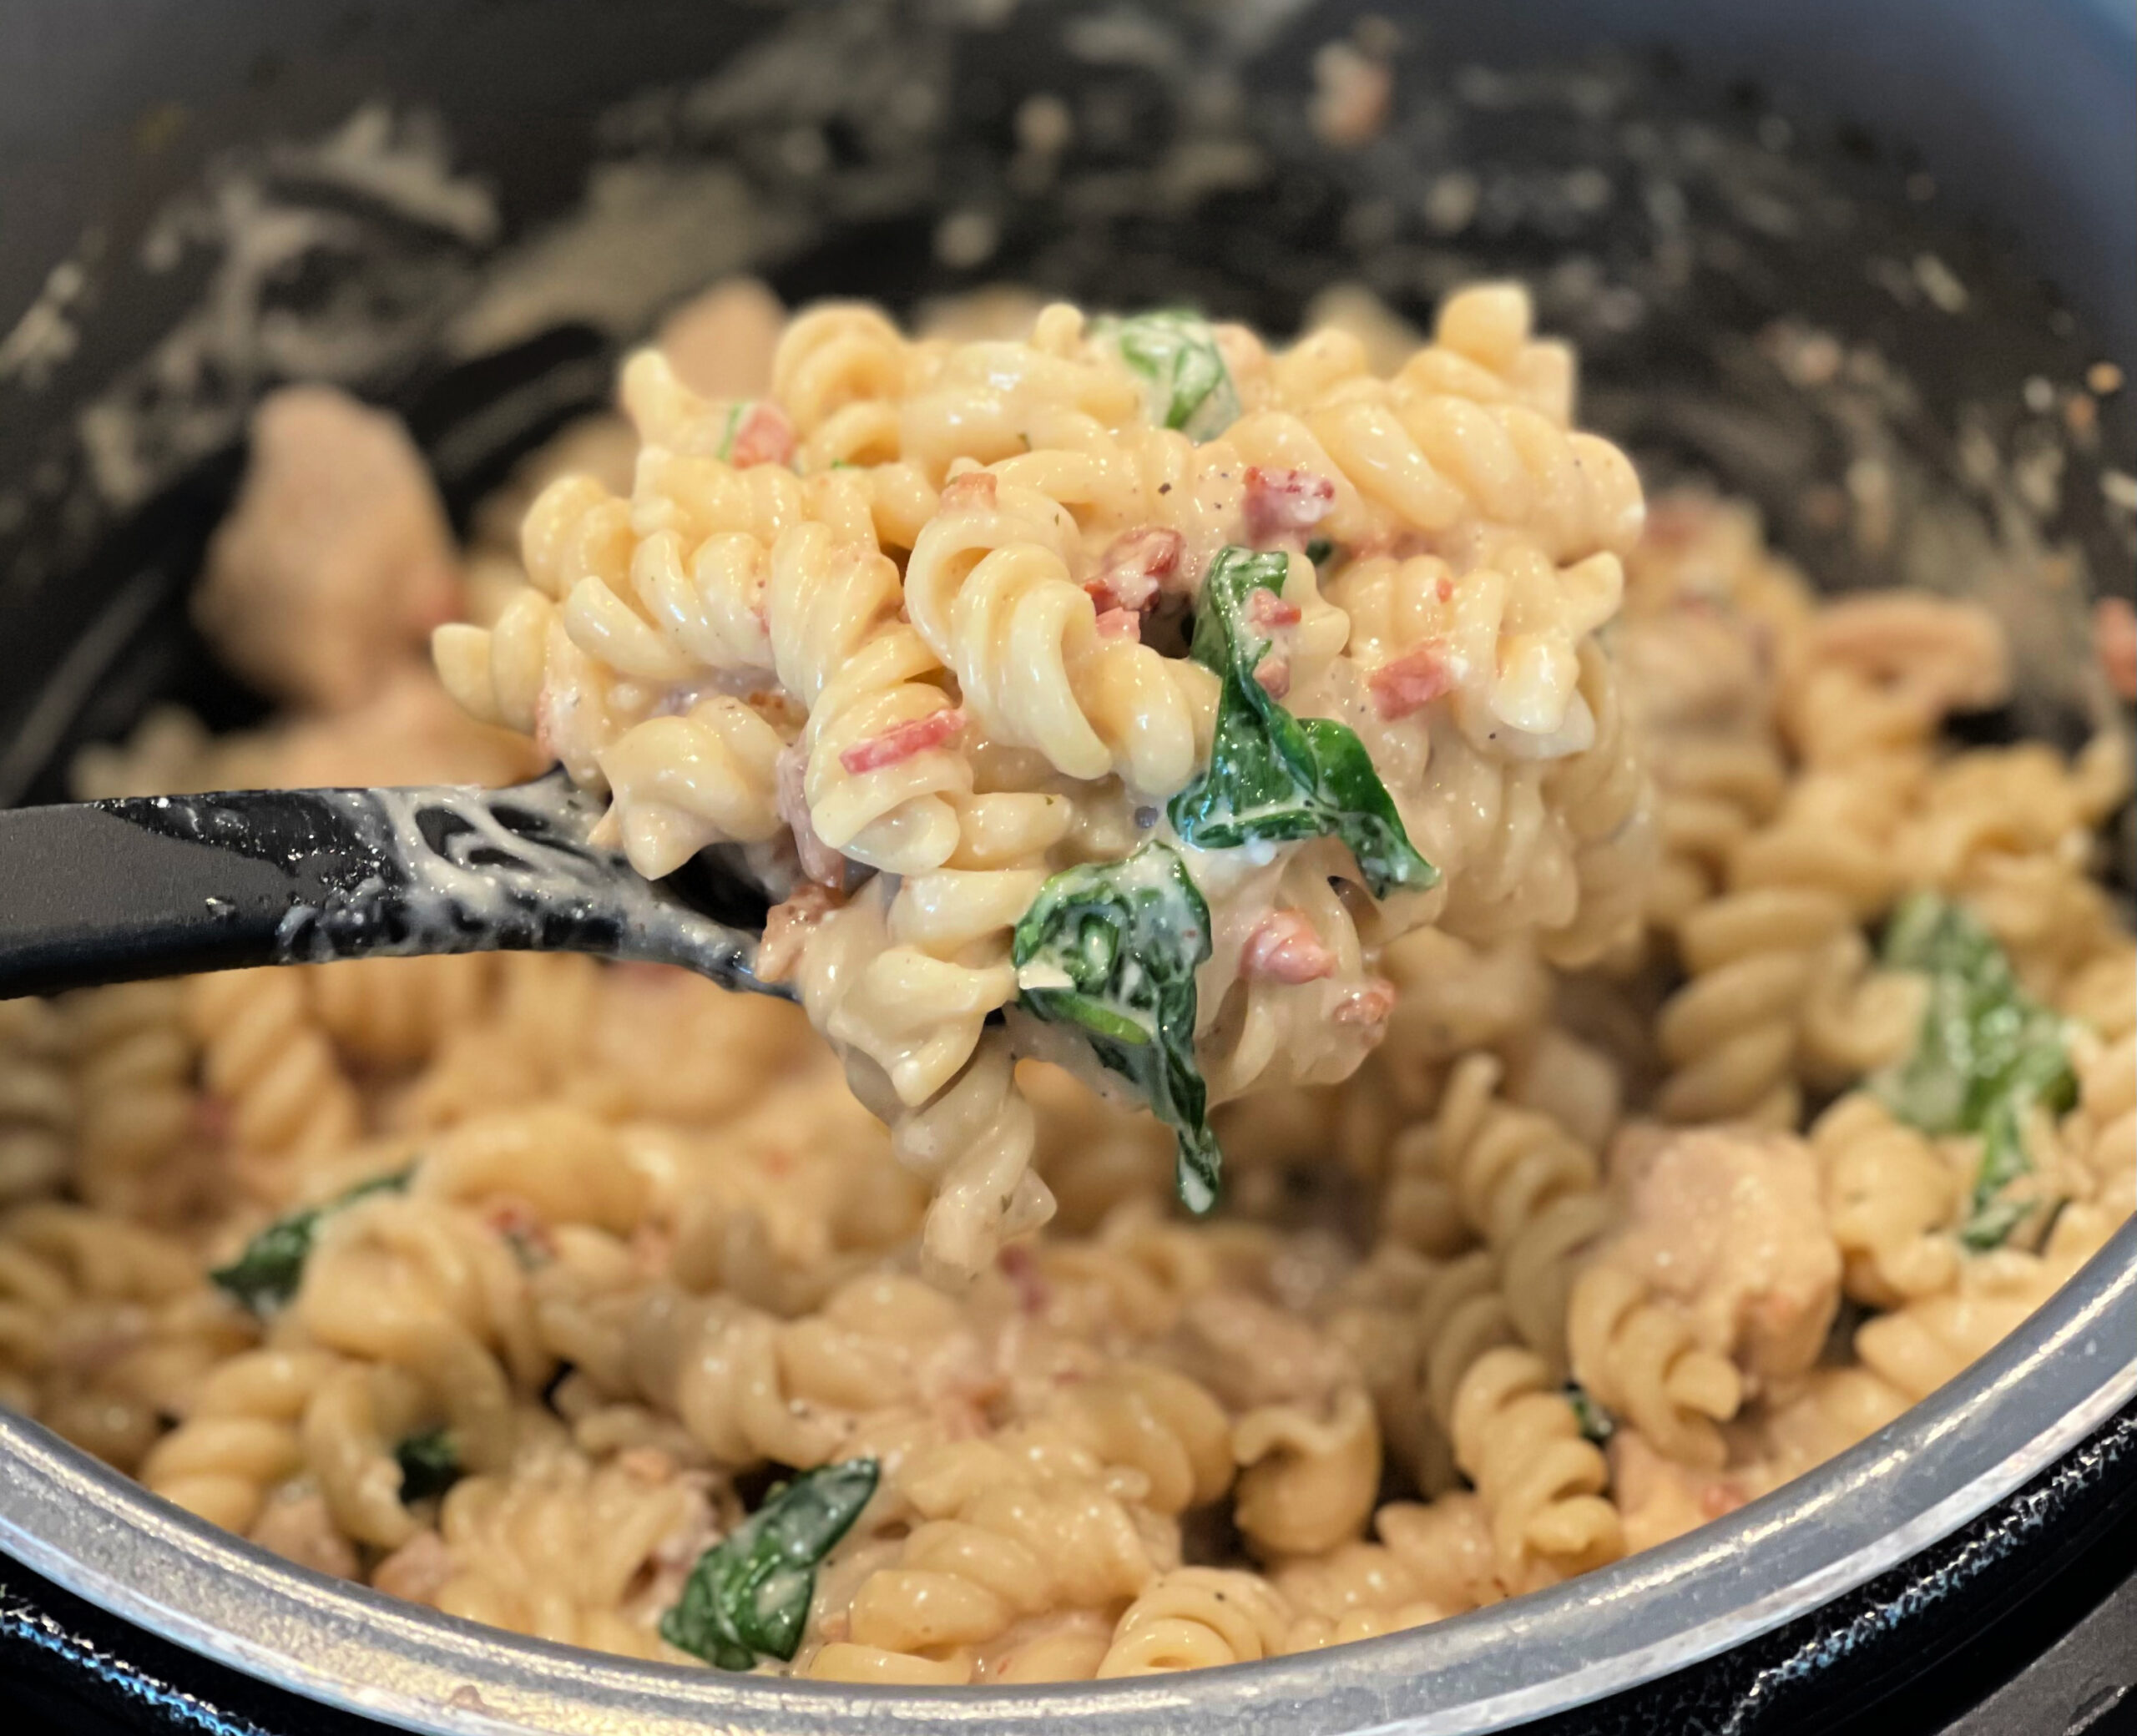 tender pasta with seasoned chicken and spinach in a creamy sauce cooked in the instant pot.